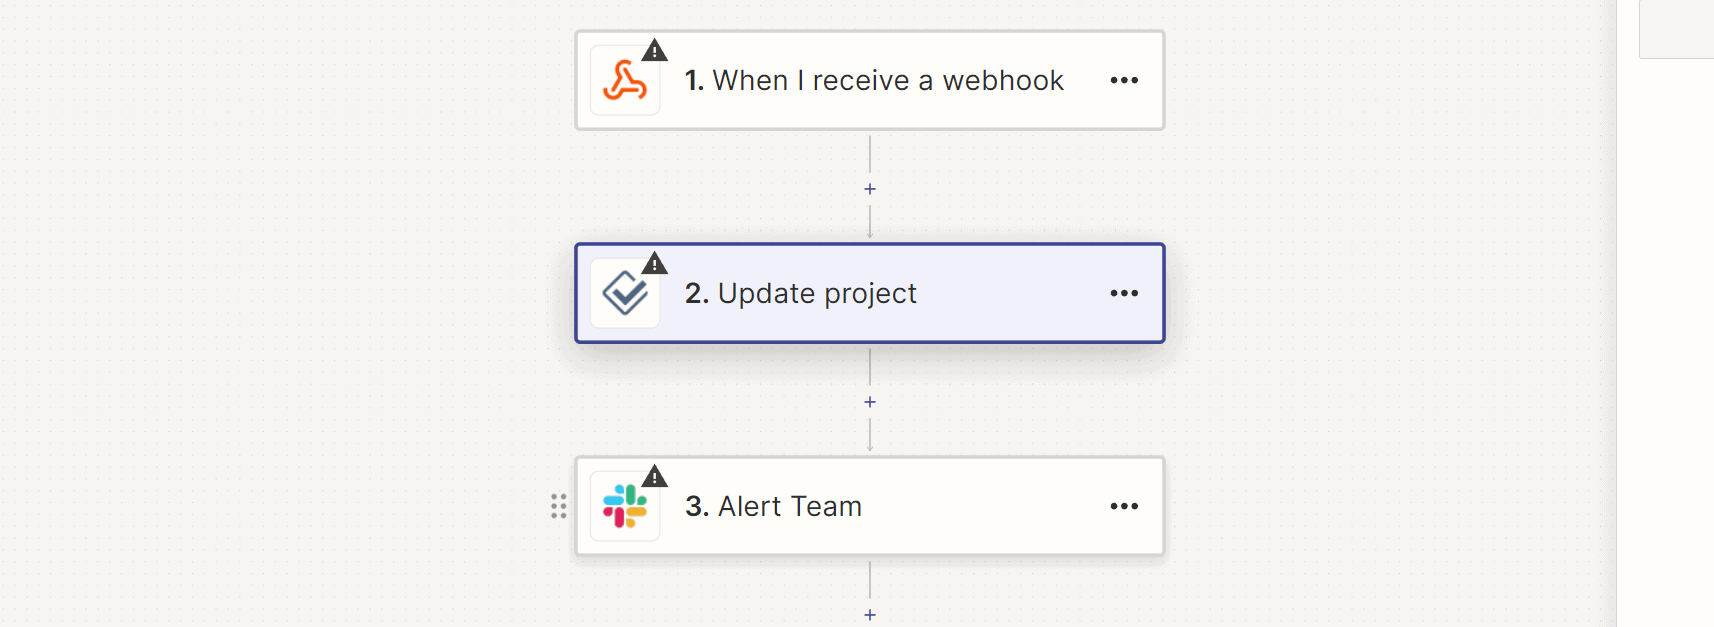 Workflow process diagram showing three steps: 1. when i receive a webhook, 2. update project, 3. alert team.